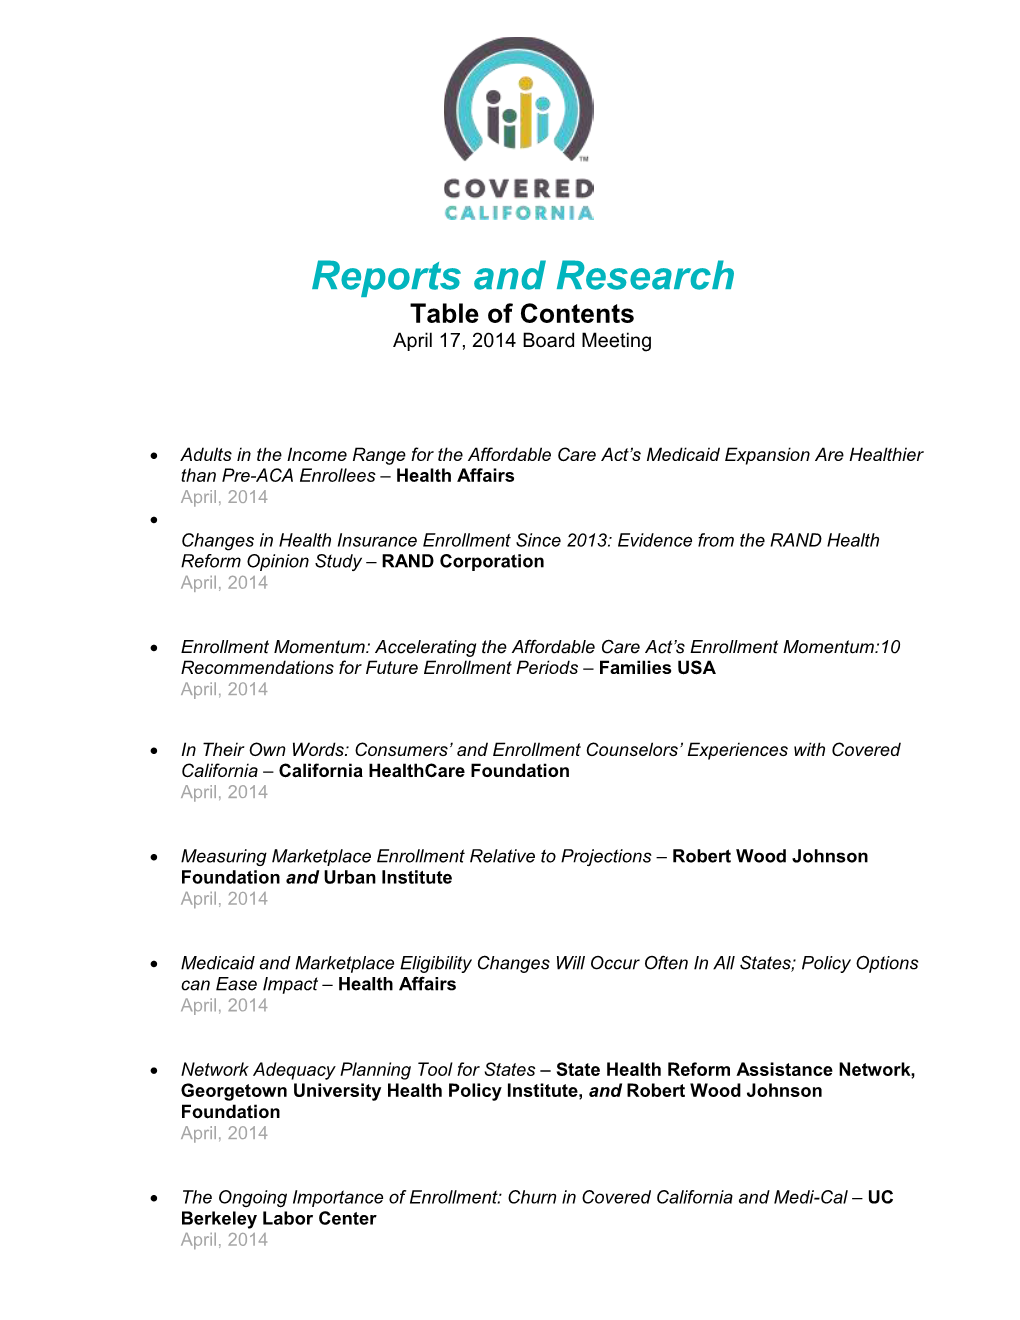 Reports and Research Table of Contents April 17, 2014 Board Meeting